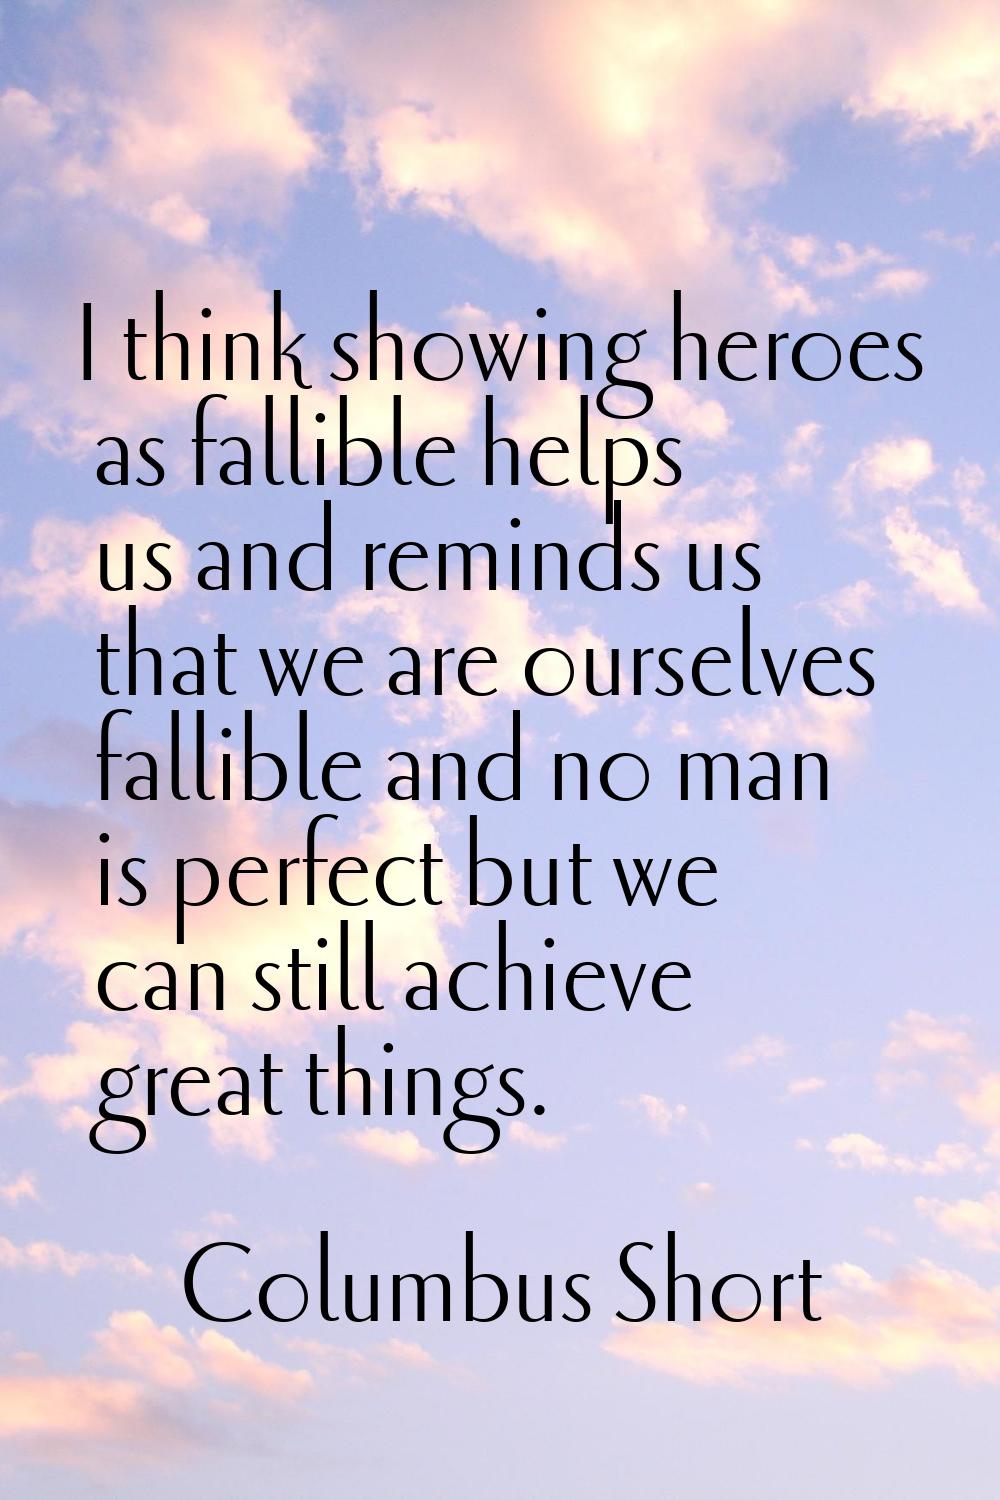 I think showing heroes as fallible helps us and reminds us that we are ourselves fallible and no ma